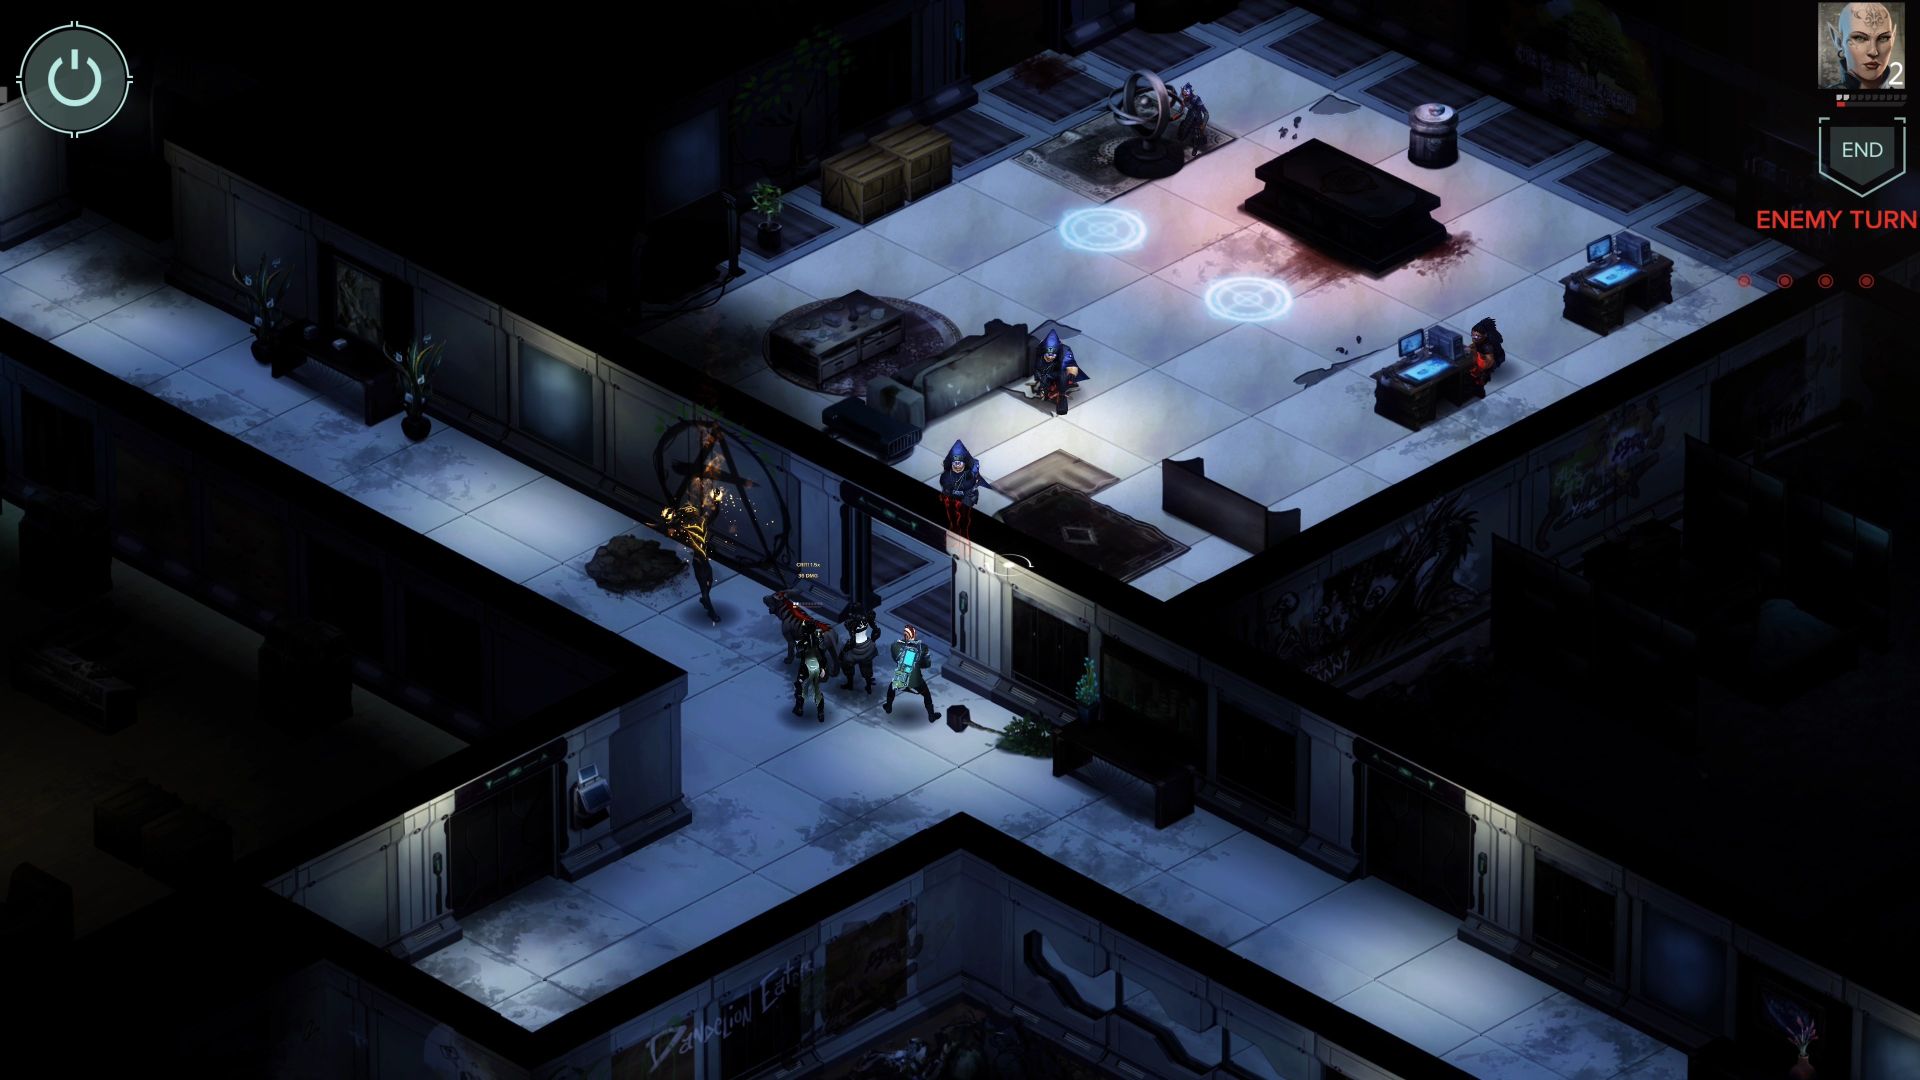 Shadowrun: Hong Kong - Extended Edition Archives - Xbox Wire